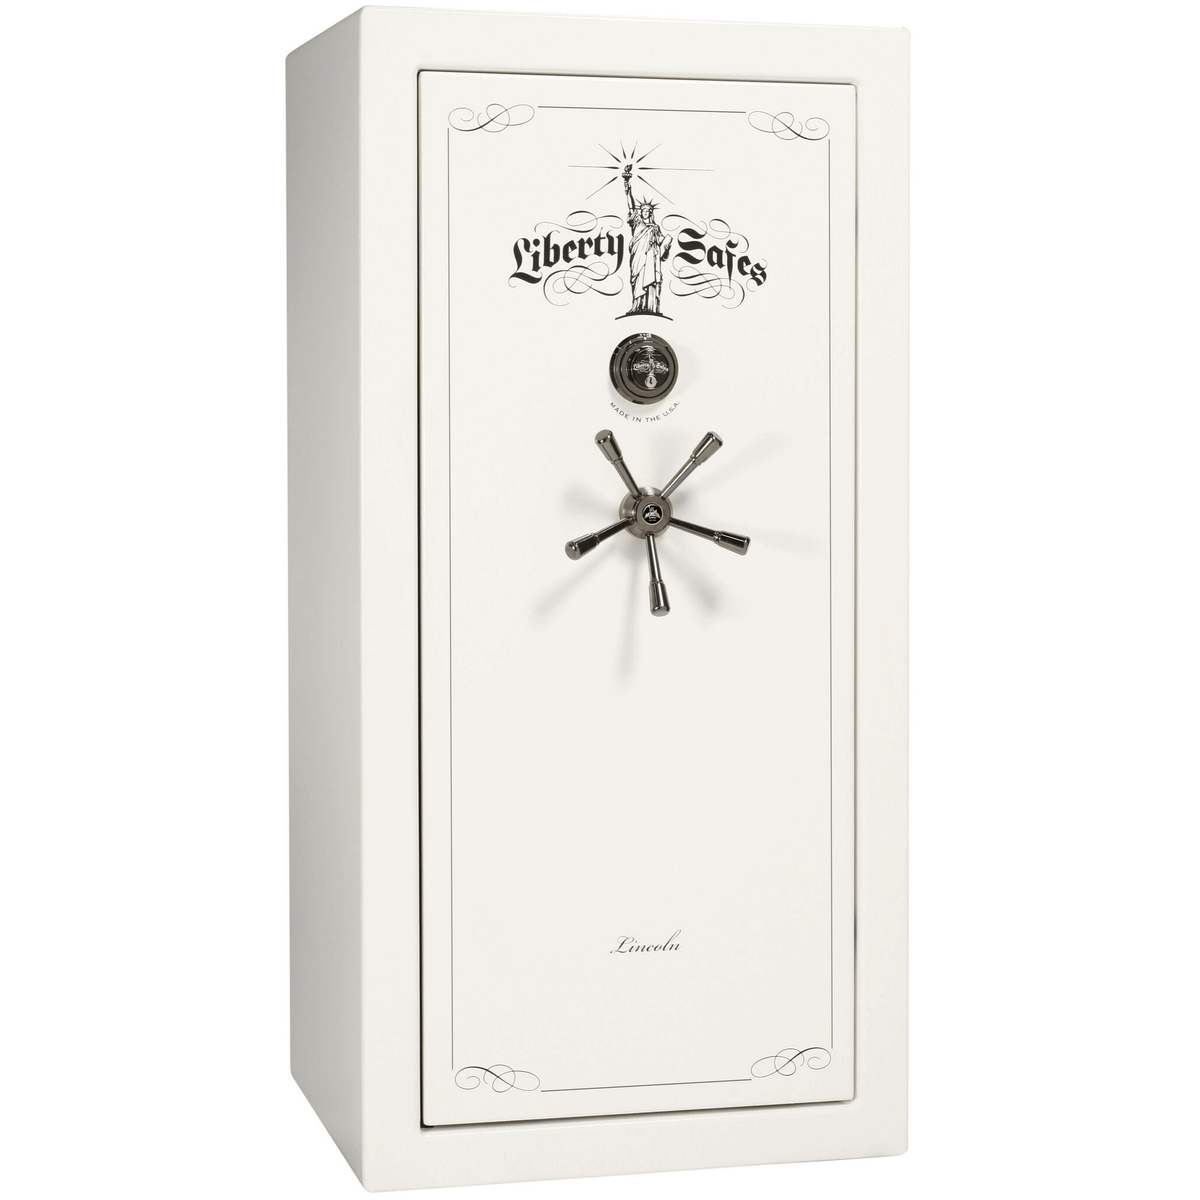 Liberty Lincoln 25 Safe in White Gloss with Black Chrome Mechanical Lock.